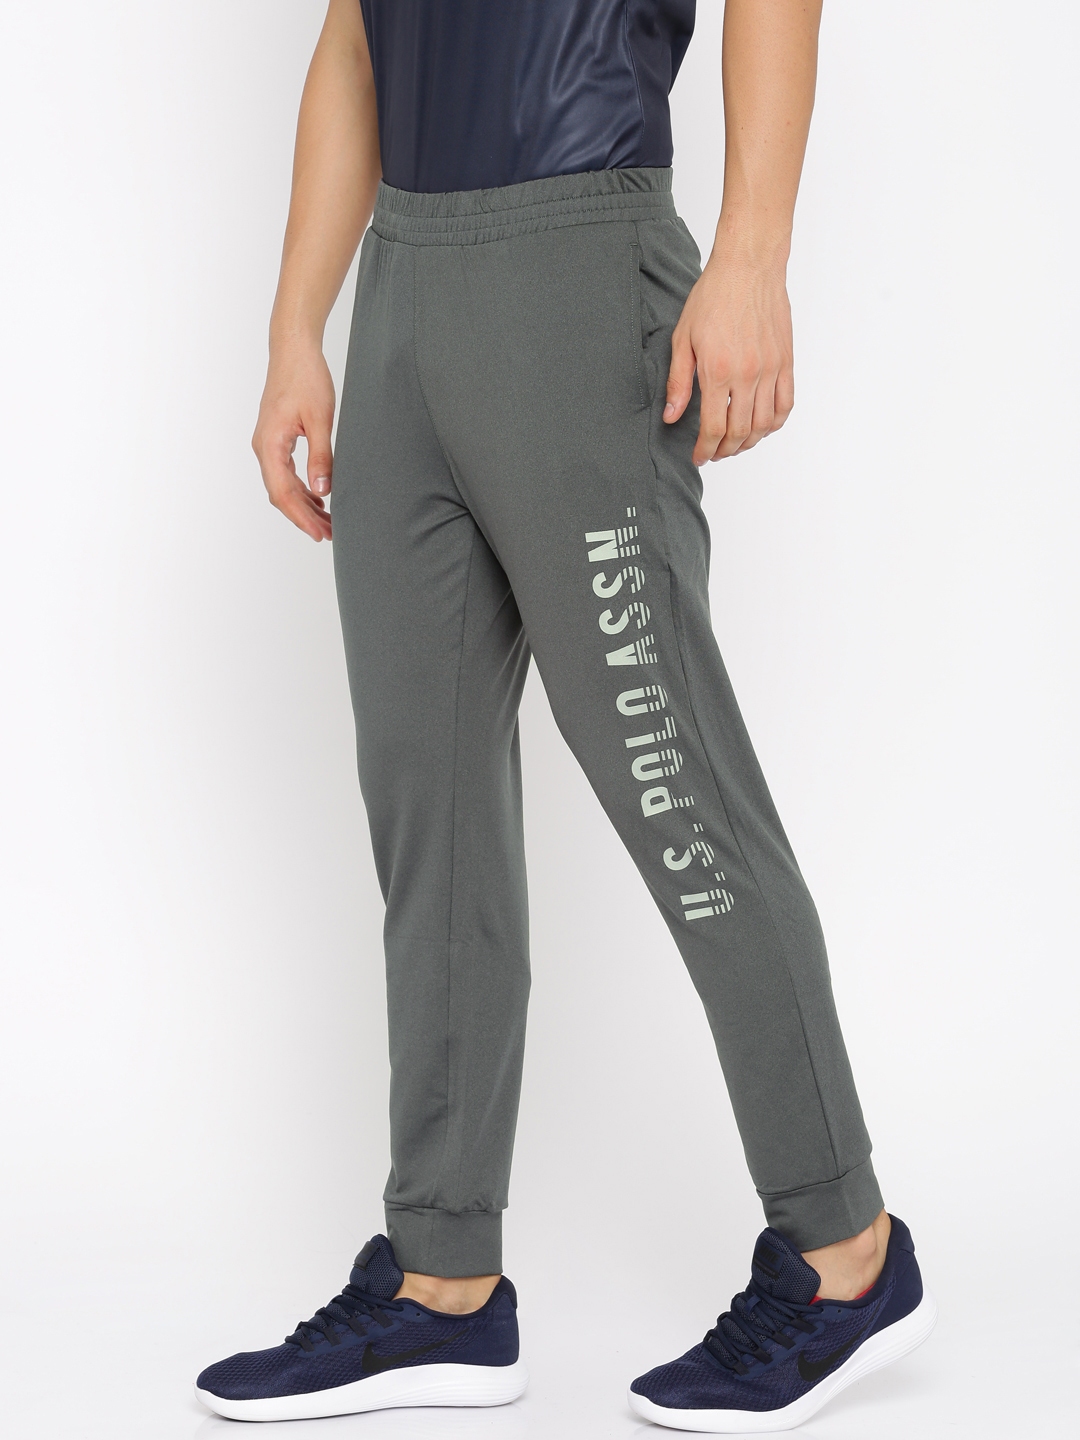 US Polo Assn Denim Co Trackpants  Buy US Polo Assn Denim Co Solid  Cotton Blend Track Pants Online  Nykaa Fashion